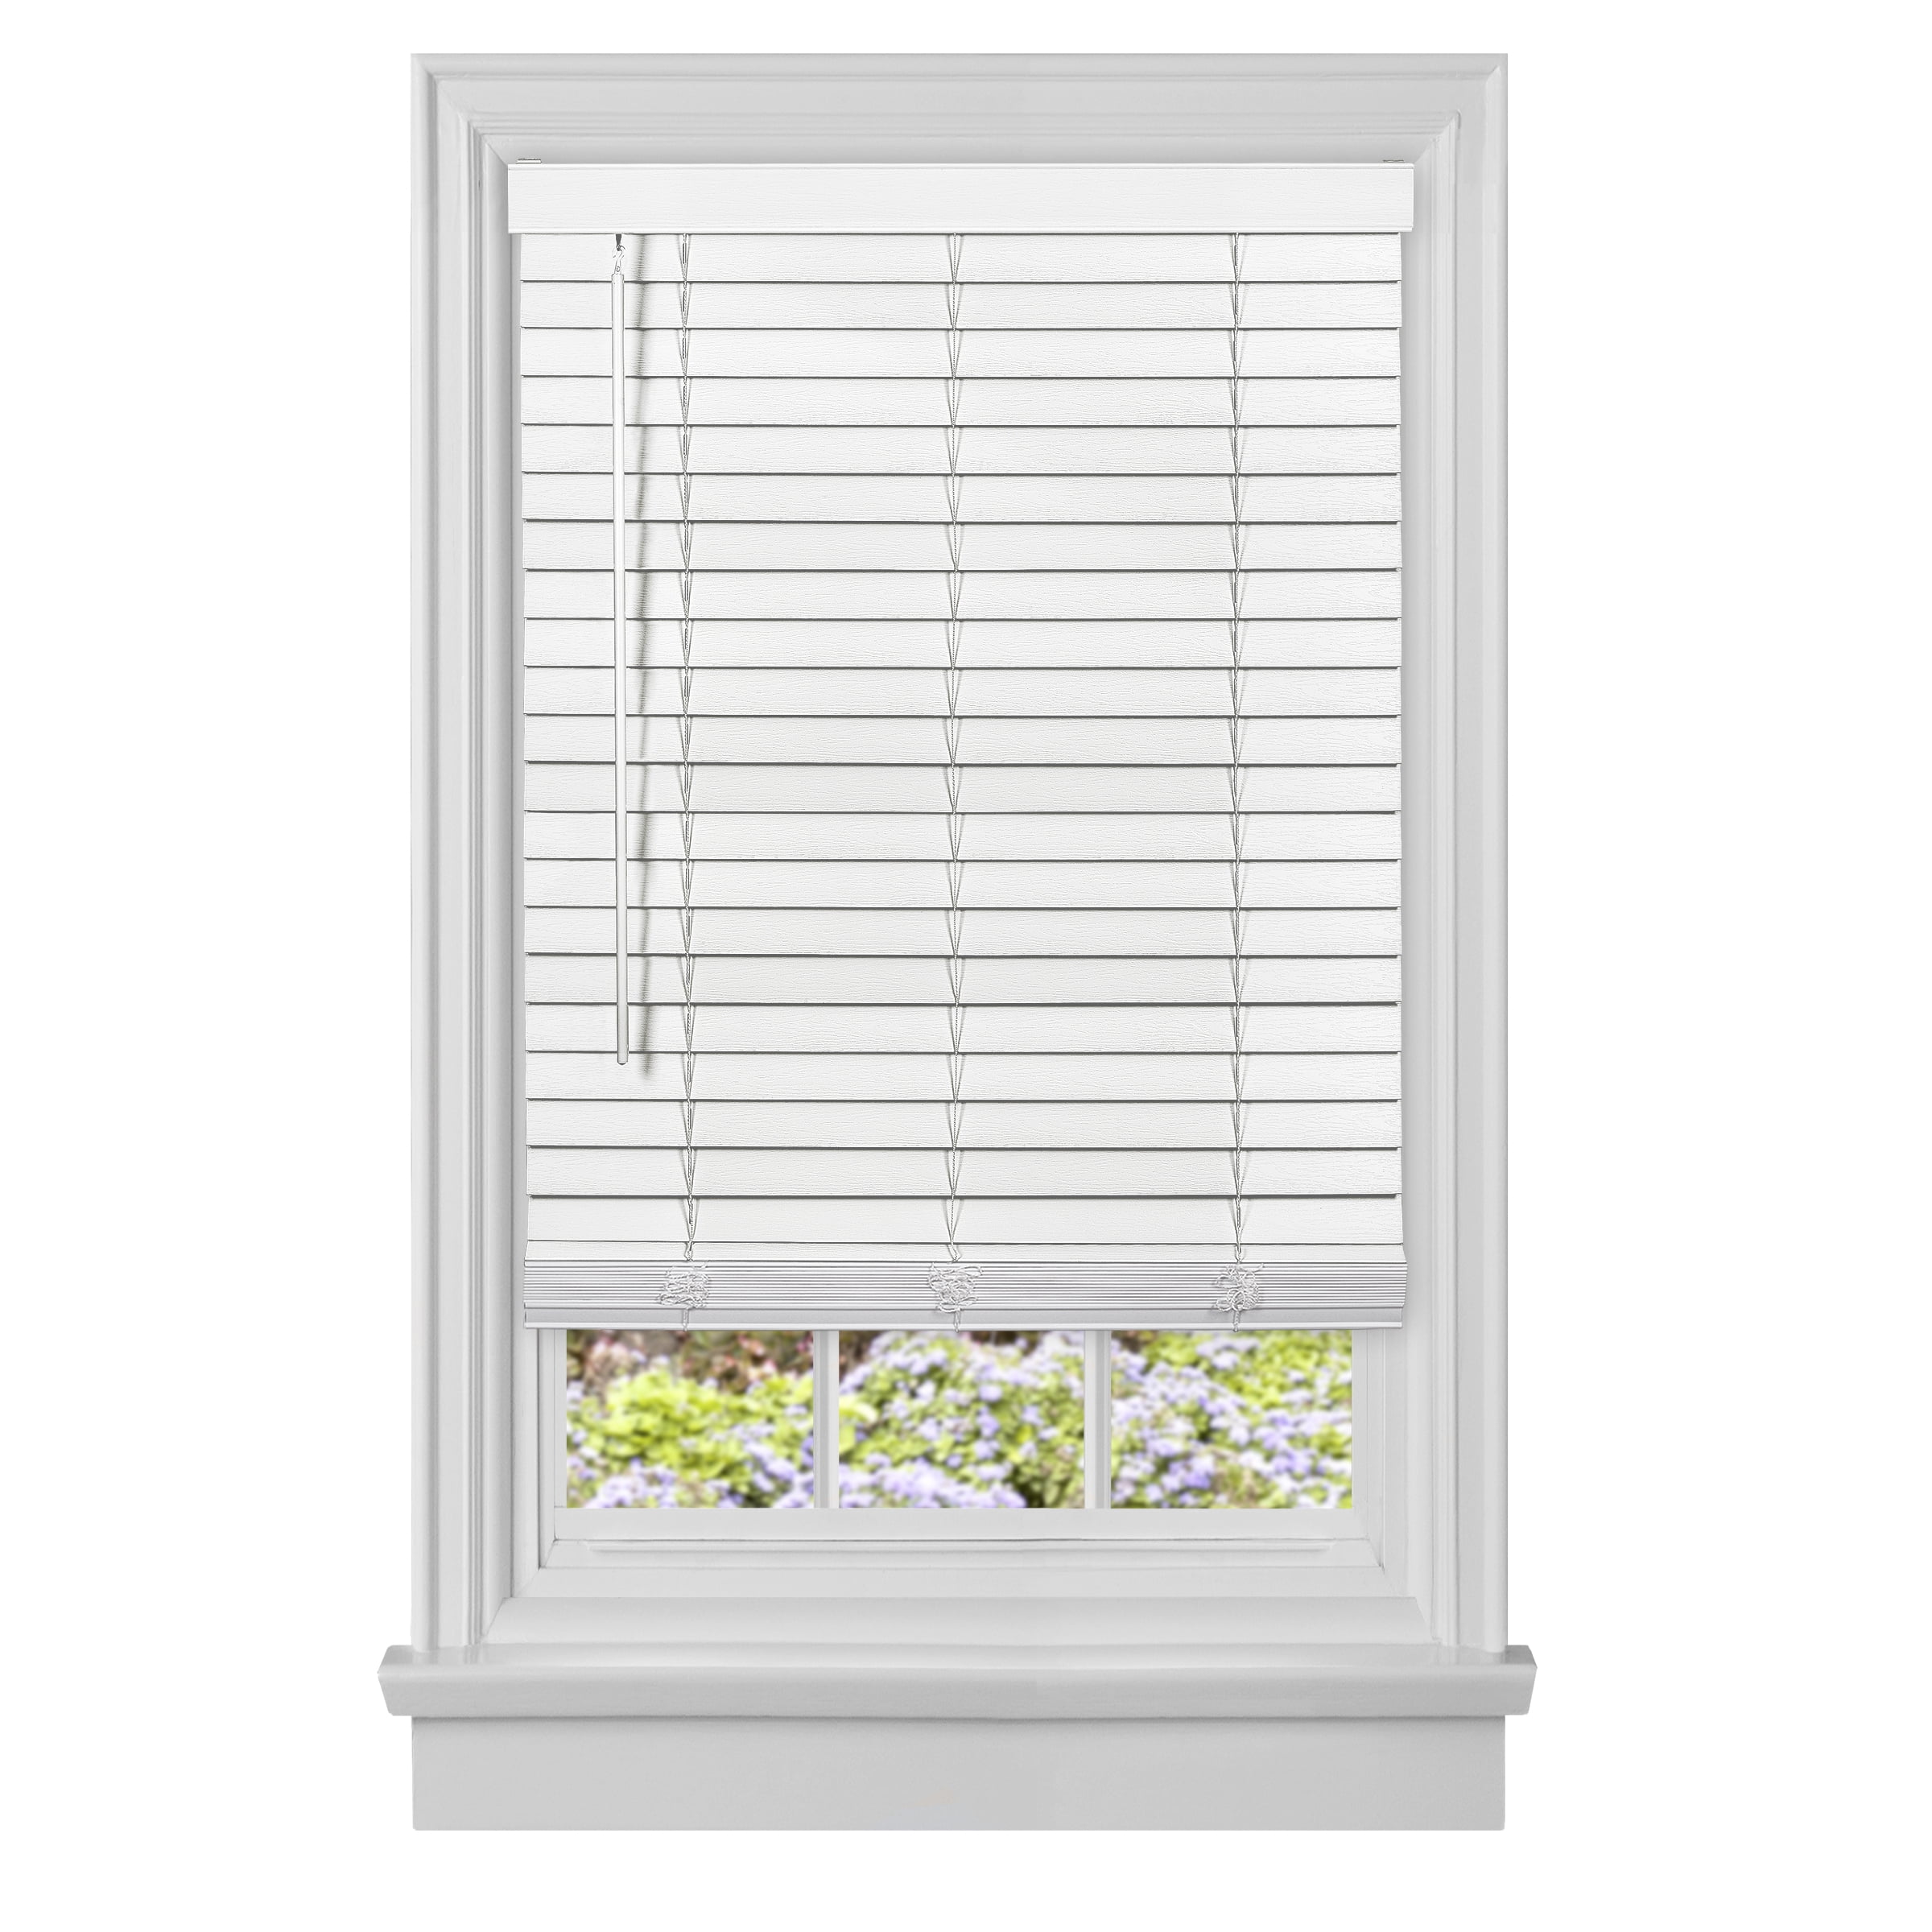 Picture of Achim MFG229WH02 29 x 64 in. Cordless GII Madera Falsa 2 in. Faux Wood Plantation Blind - White